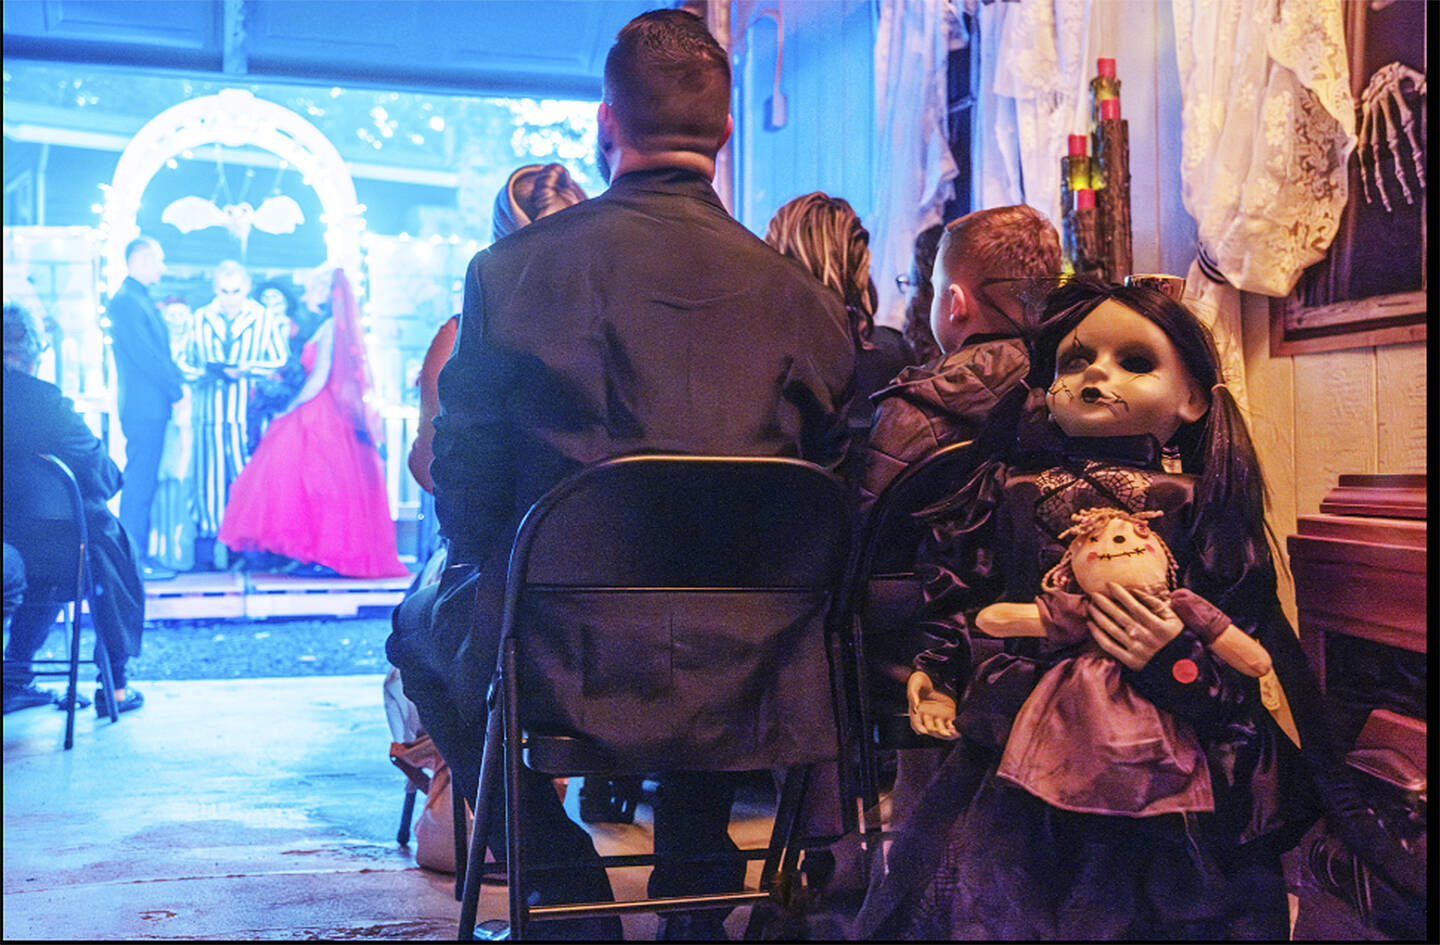 A wedding with a Halloween theme includes all types of costumes.